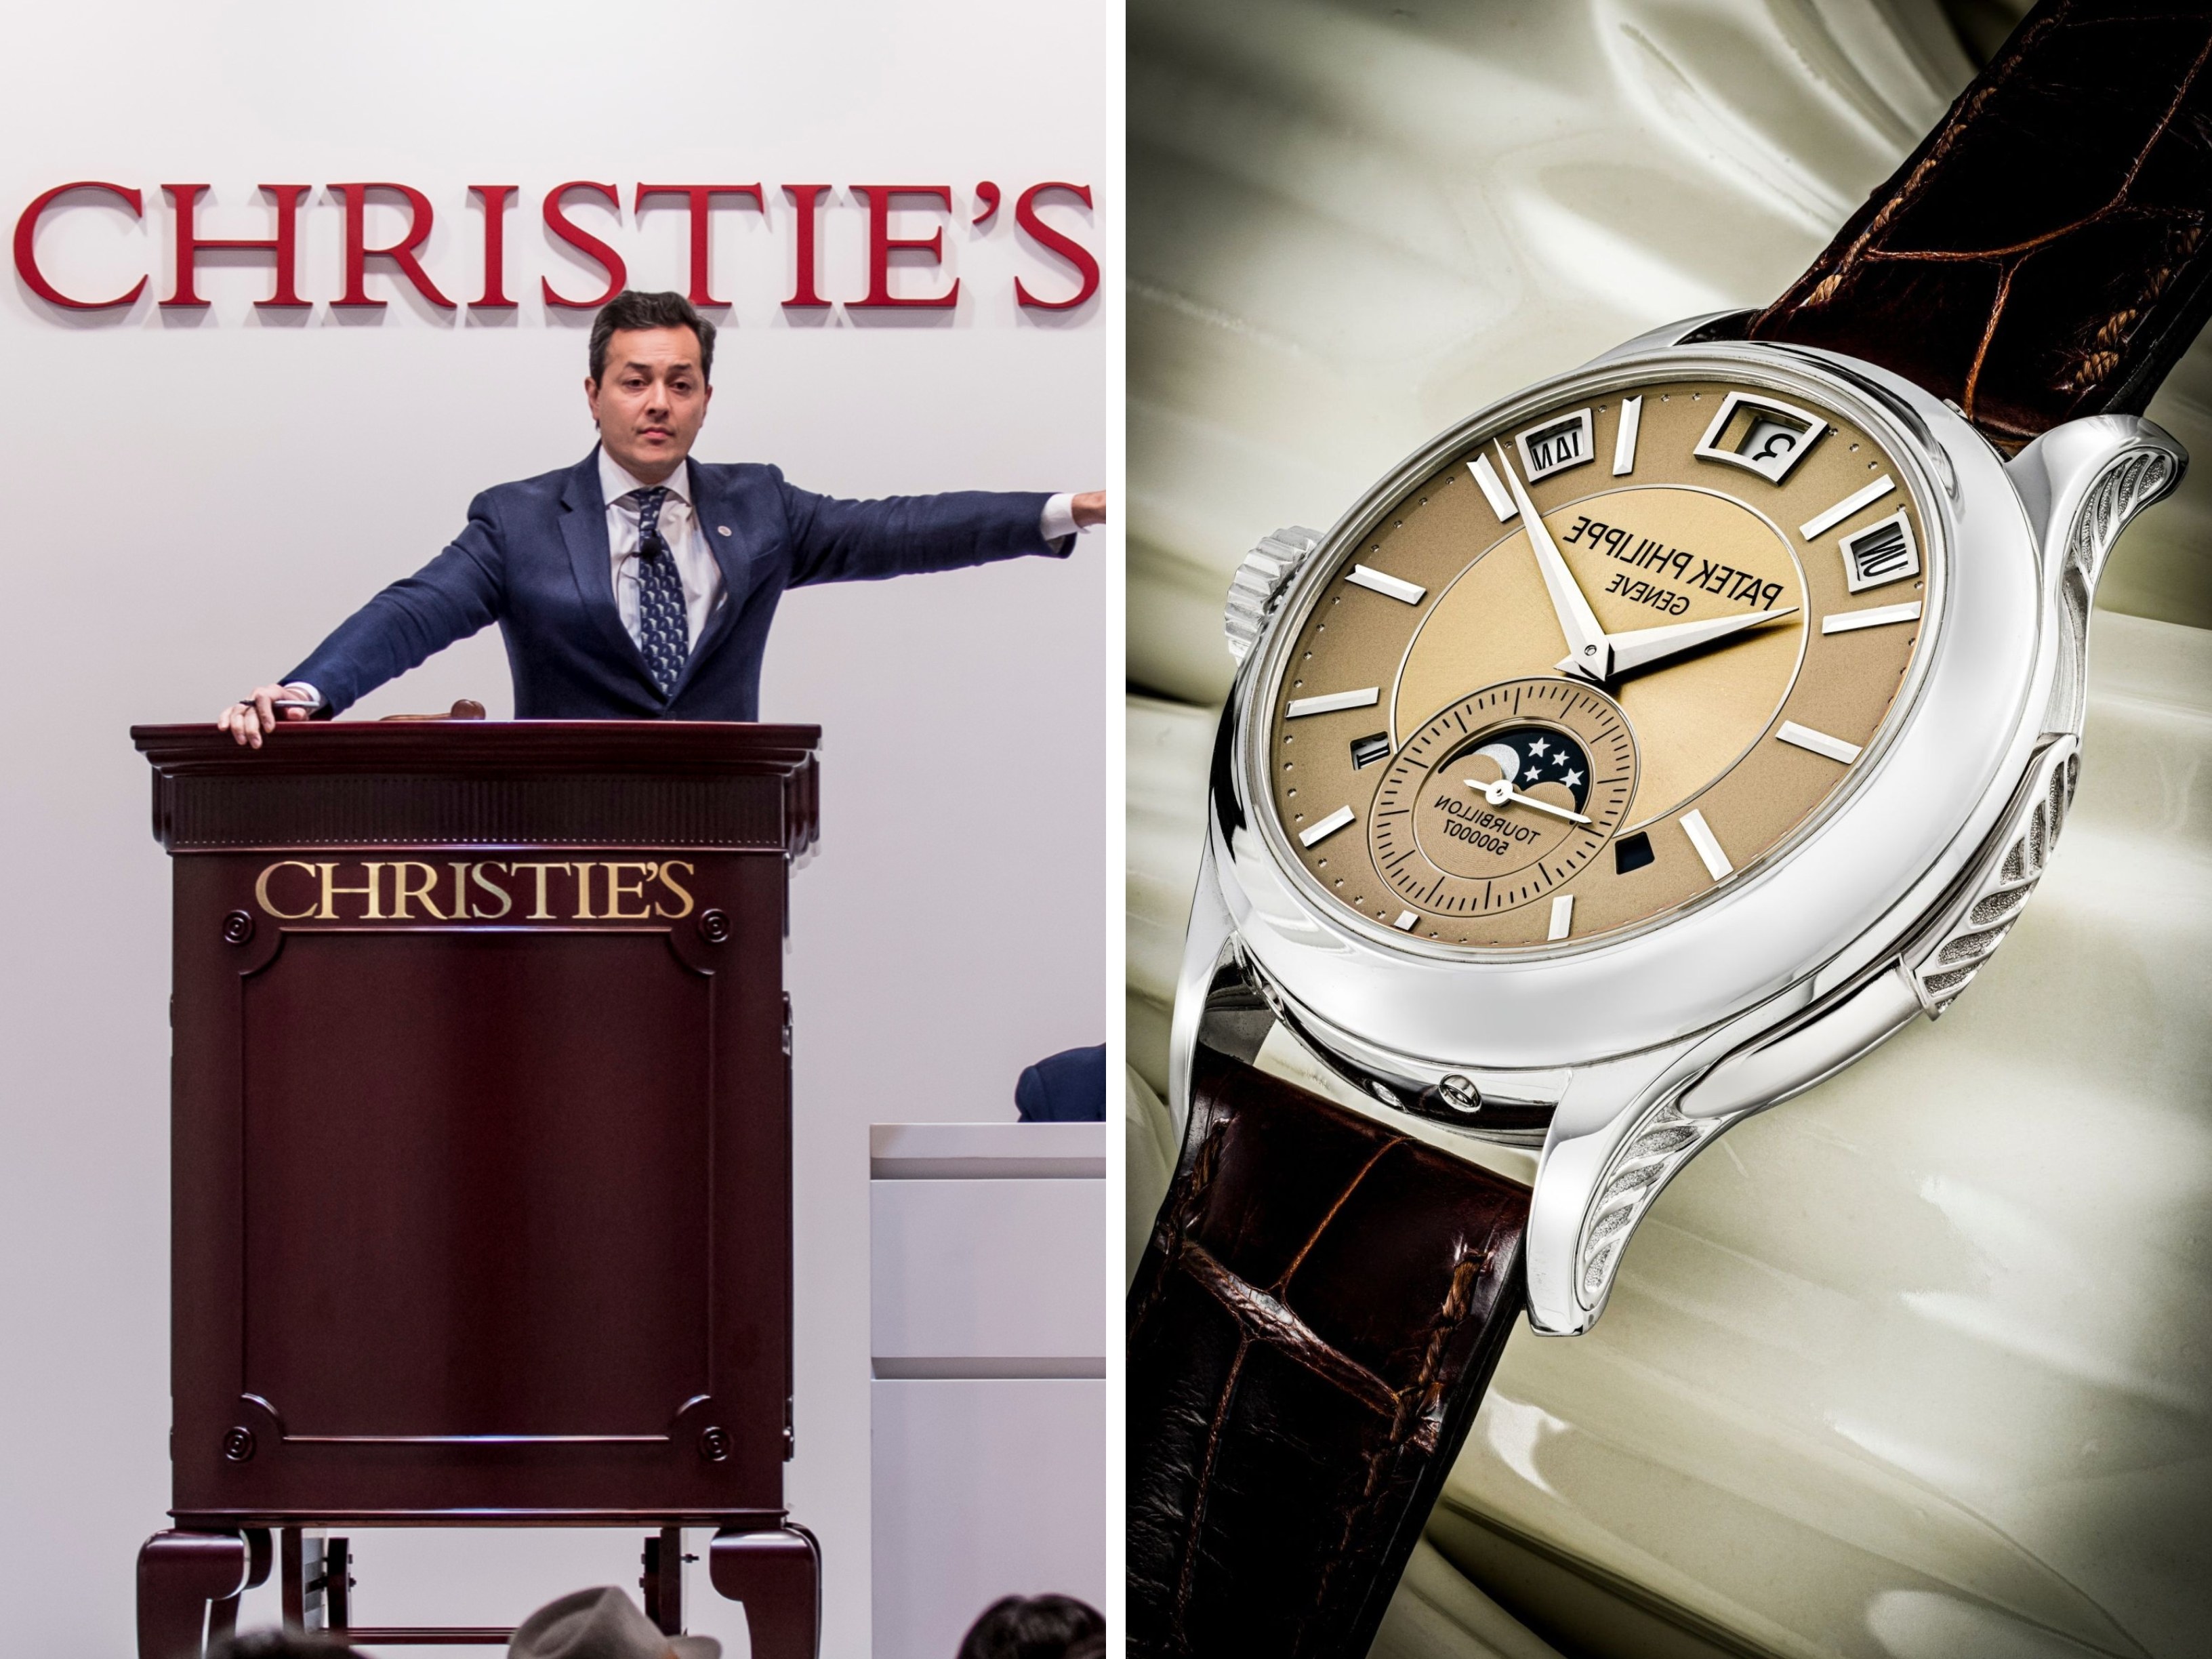 Christie’s Hong Kong will be hosting a record-breaking watch auction on May 26, at the Hong Kong Convention and Exhibition Centre. Photo: Christie’s, Getty Images